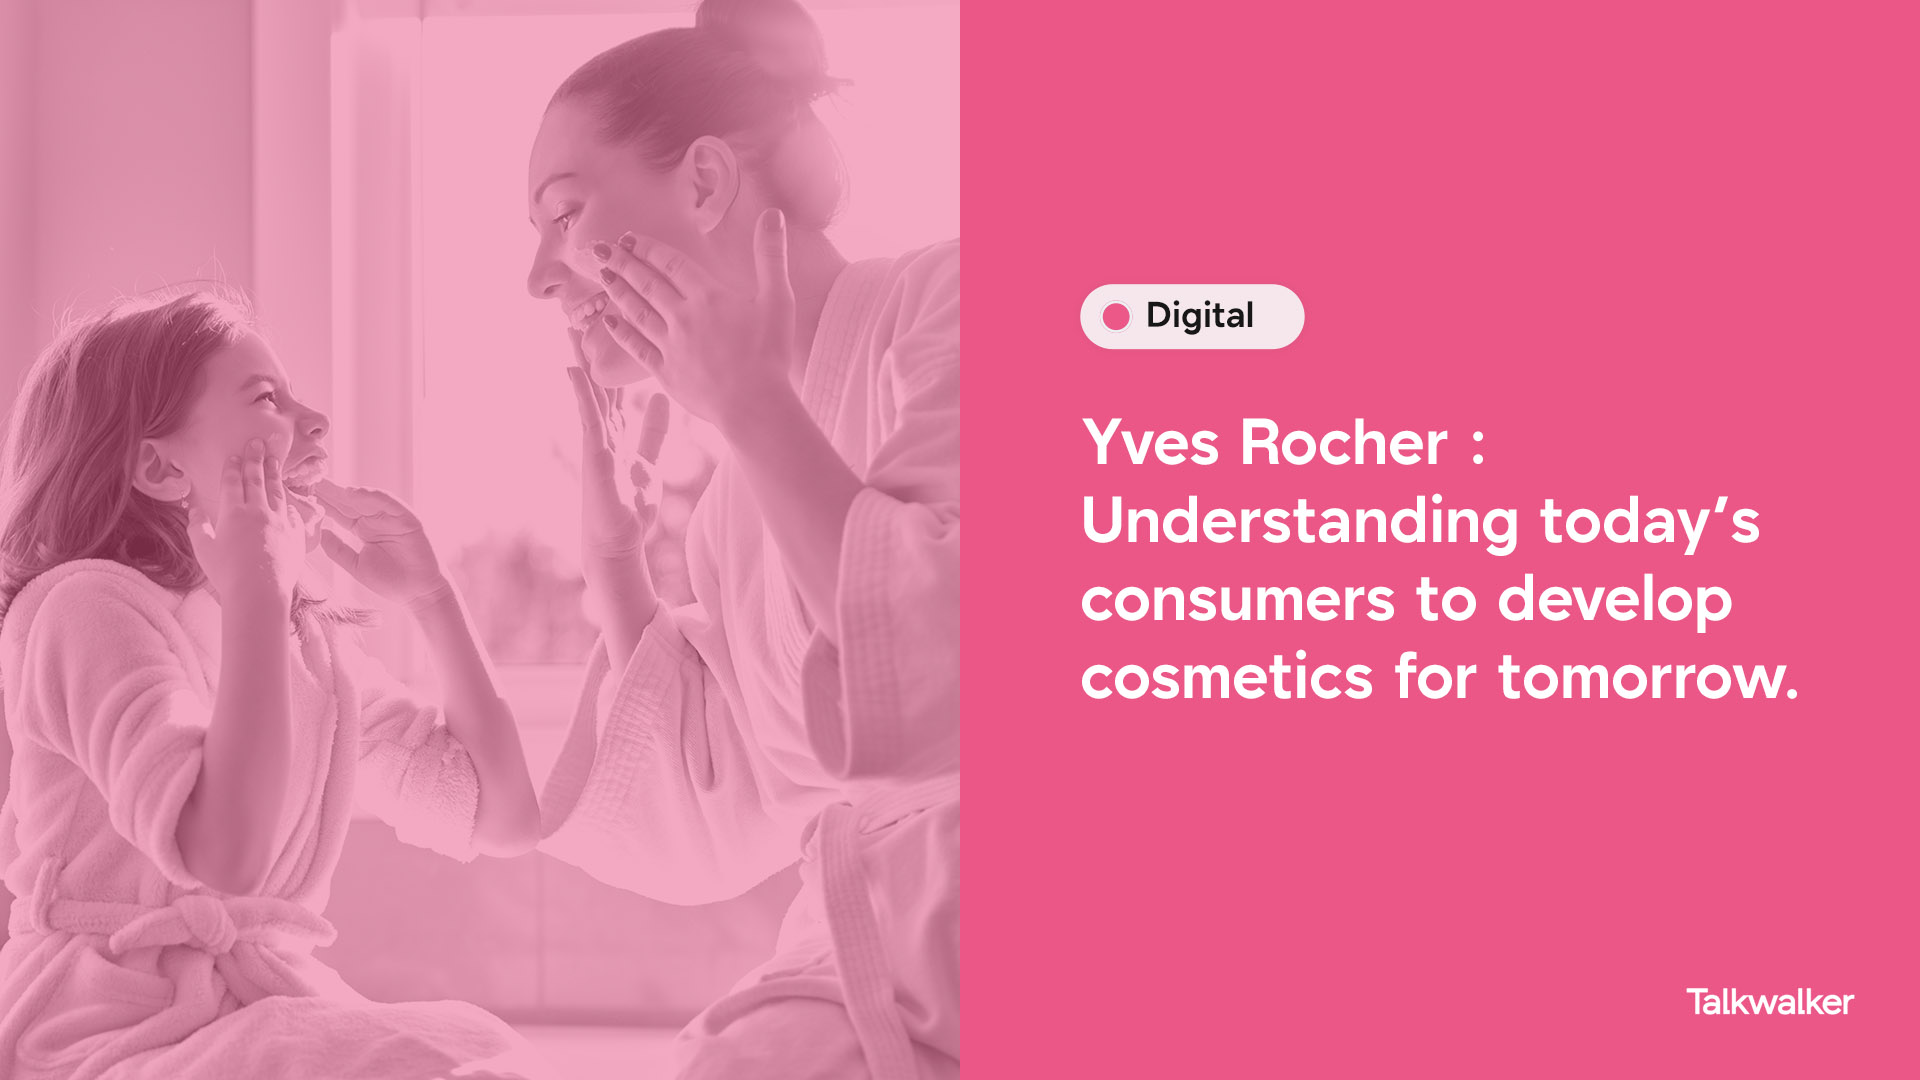 Yves Rocher: understanding today's consumers to develop cosmetics for tomorrow